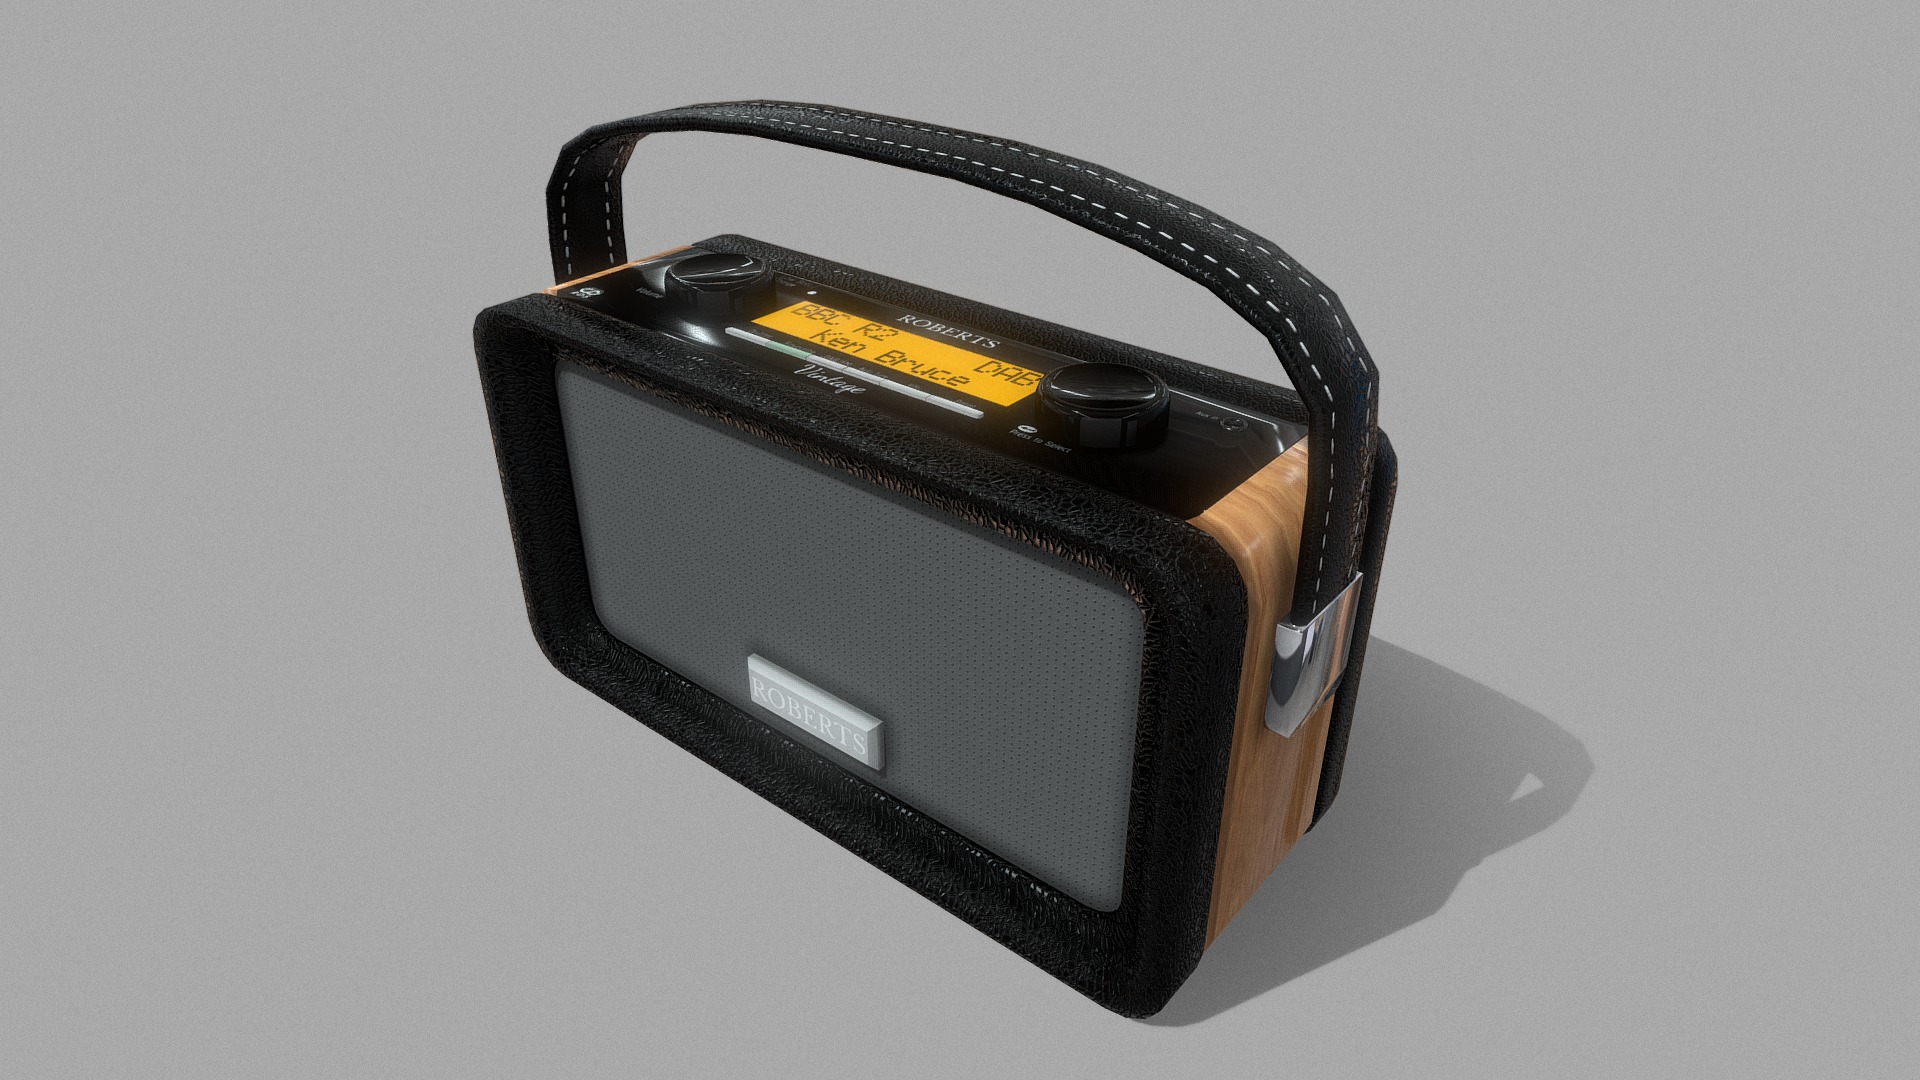 3D model Roberts Vintage Radio - This is a 3D model of the Roberts Vintage Radio. The 3D model is about a black and silver electronic device.